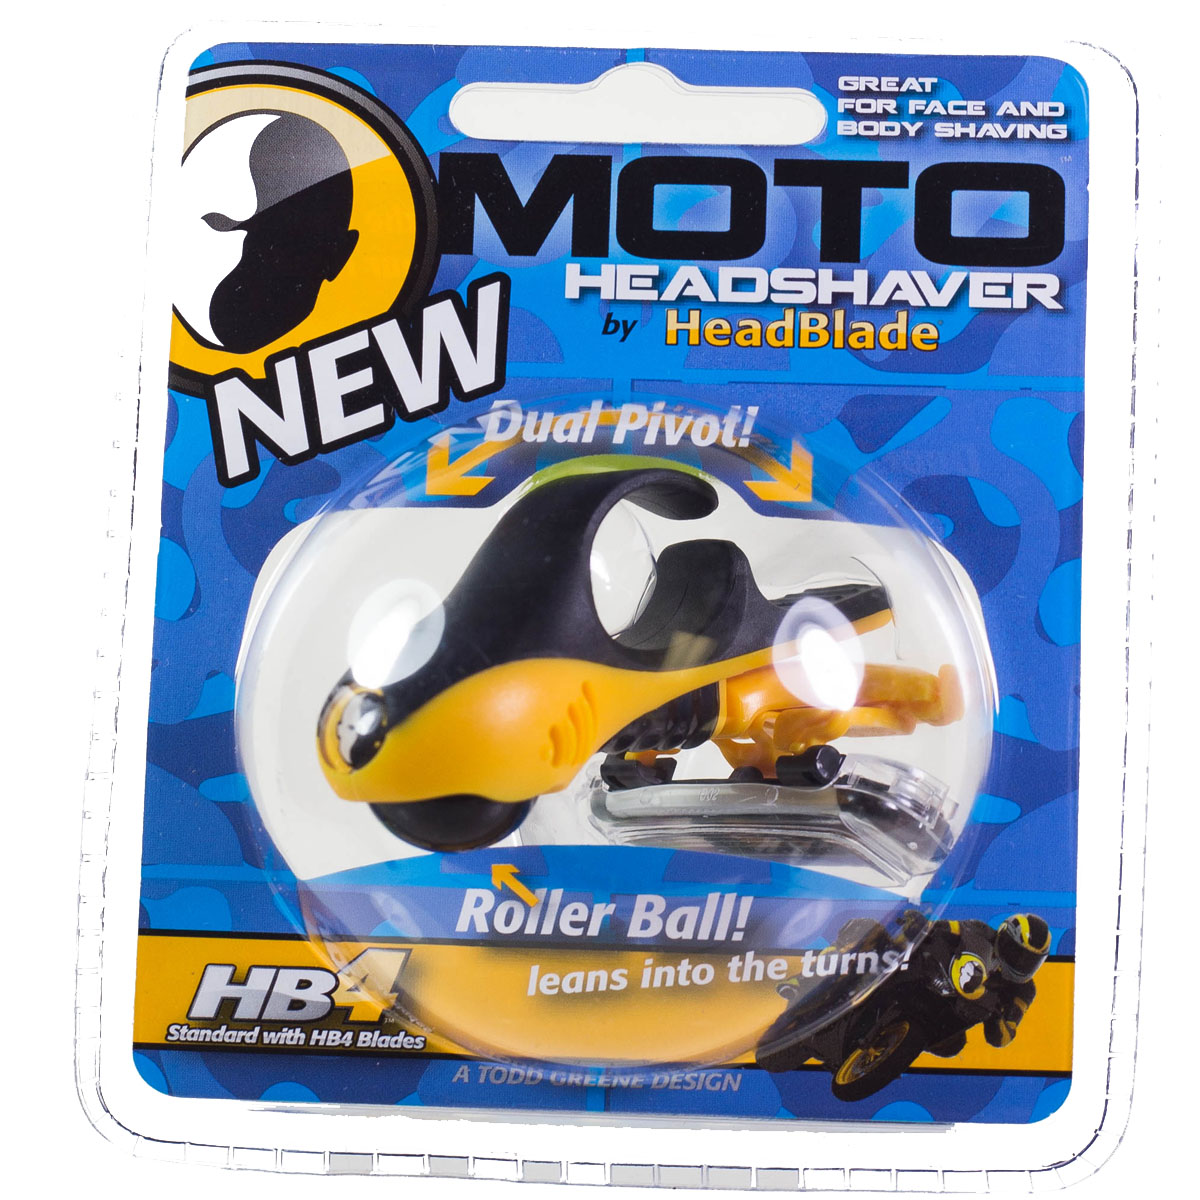 HeadBlade MOTO Head Shaver, Head and Skull Razor, Dual Pivot, Roller Ball with HB4 Blades - image 2 of 2